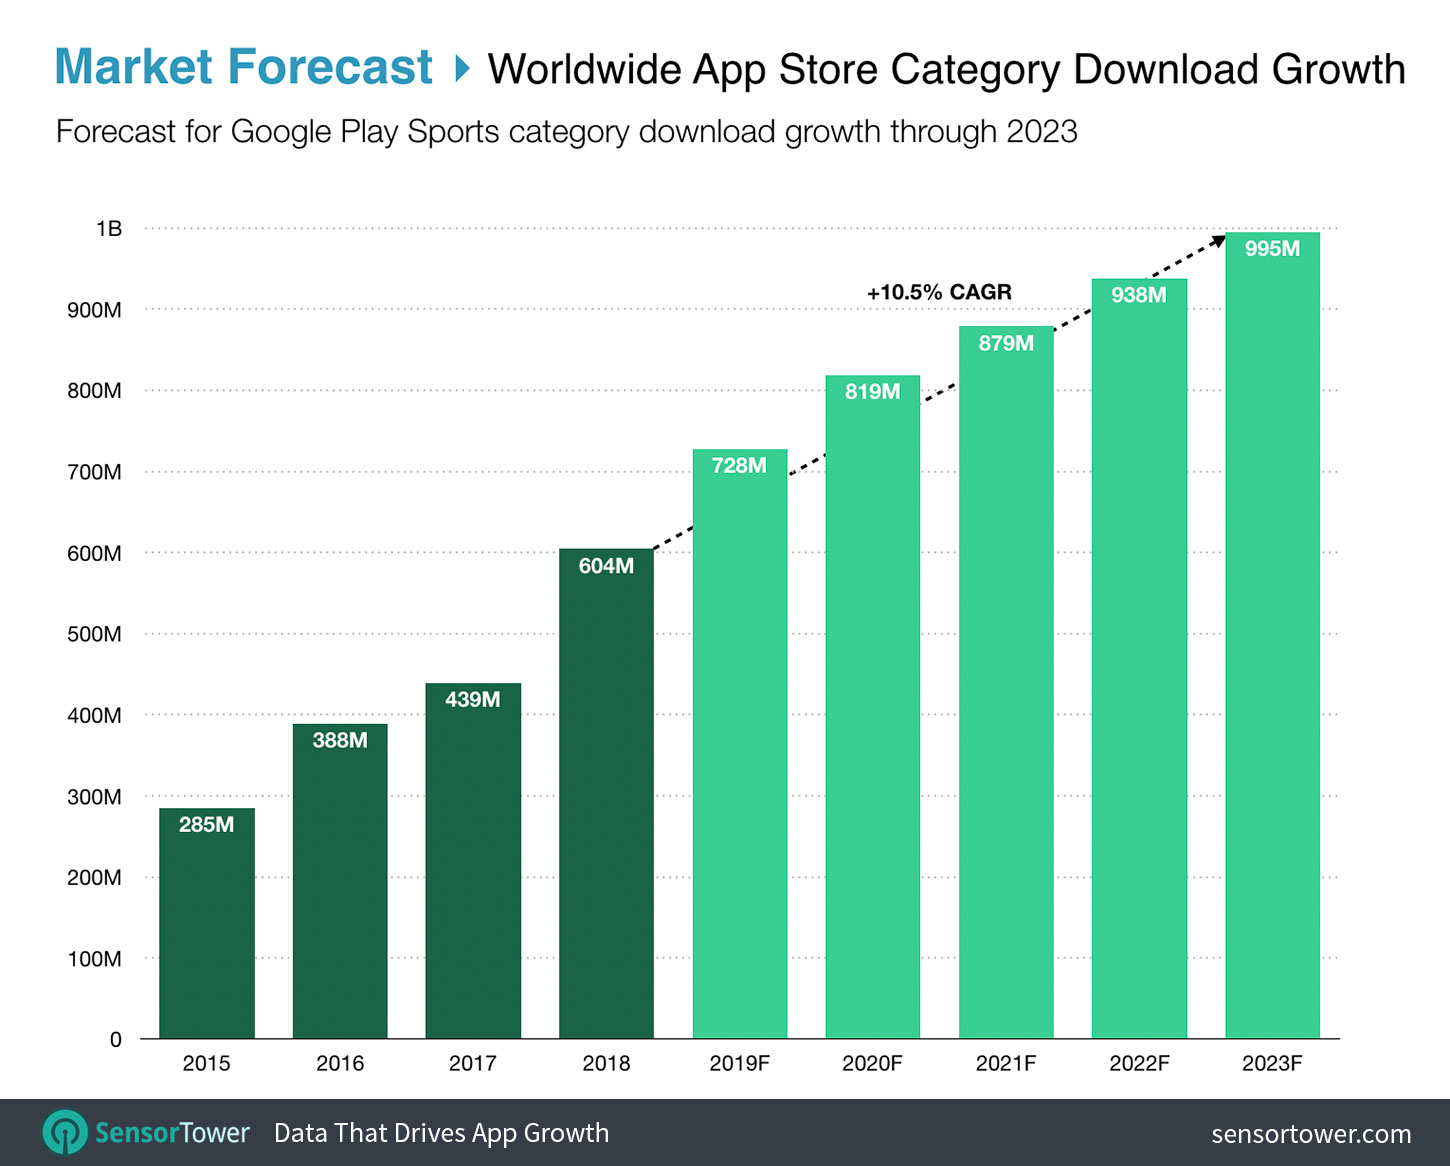 Worldwide Sports Apps Download Growth Forecast Chart for the Google Play Store